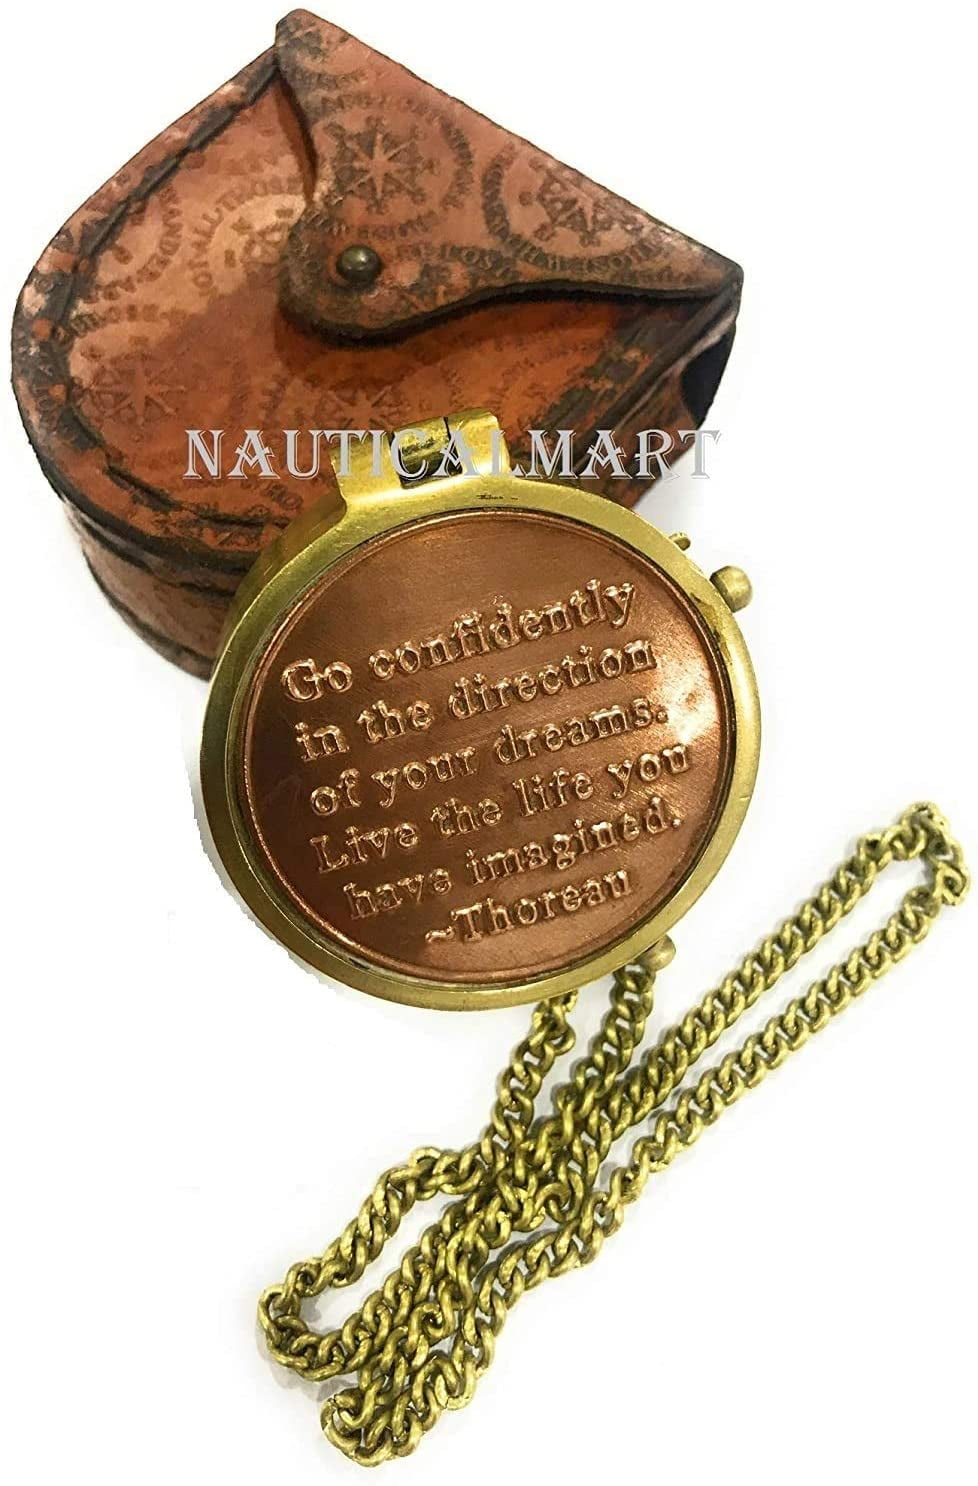 Go Confidently Quote Engraved Brass Compass with Stamped Leather case Thoreau's 